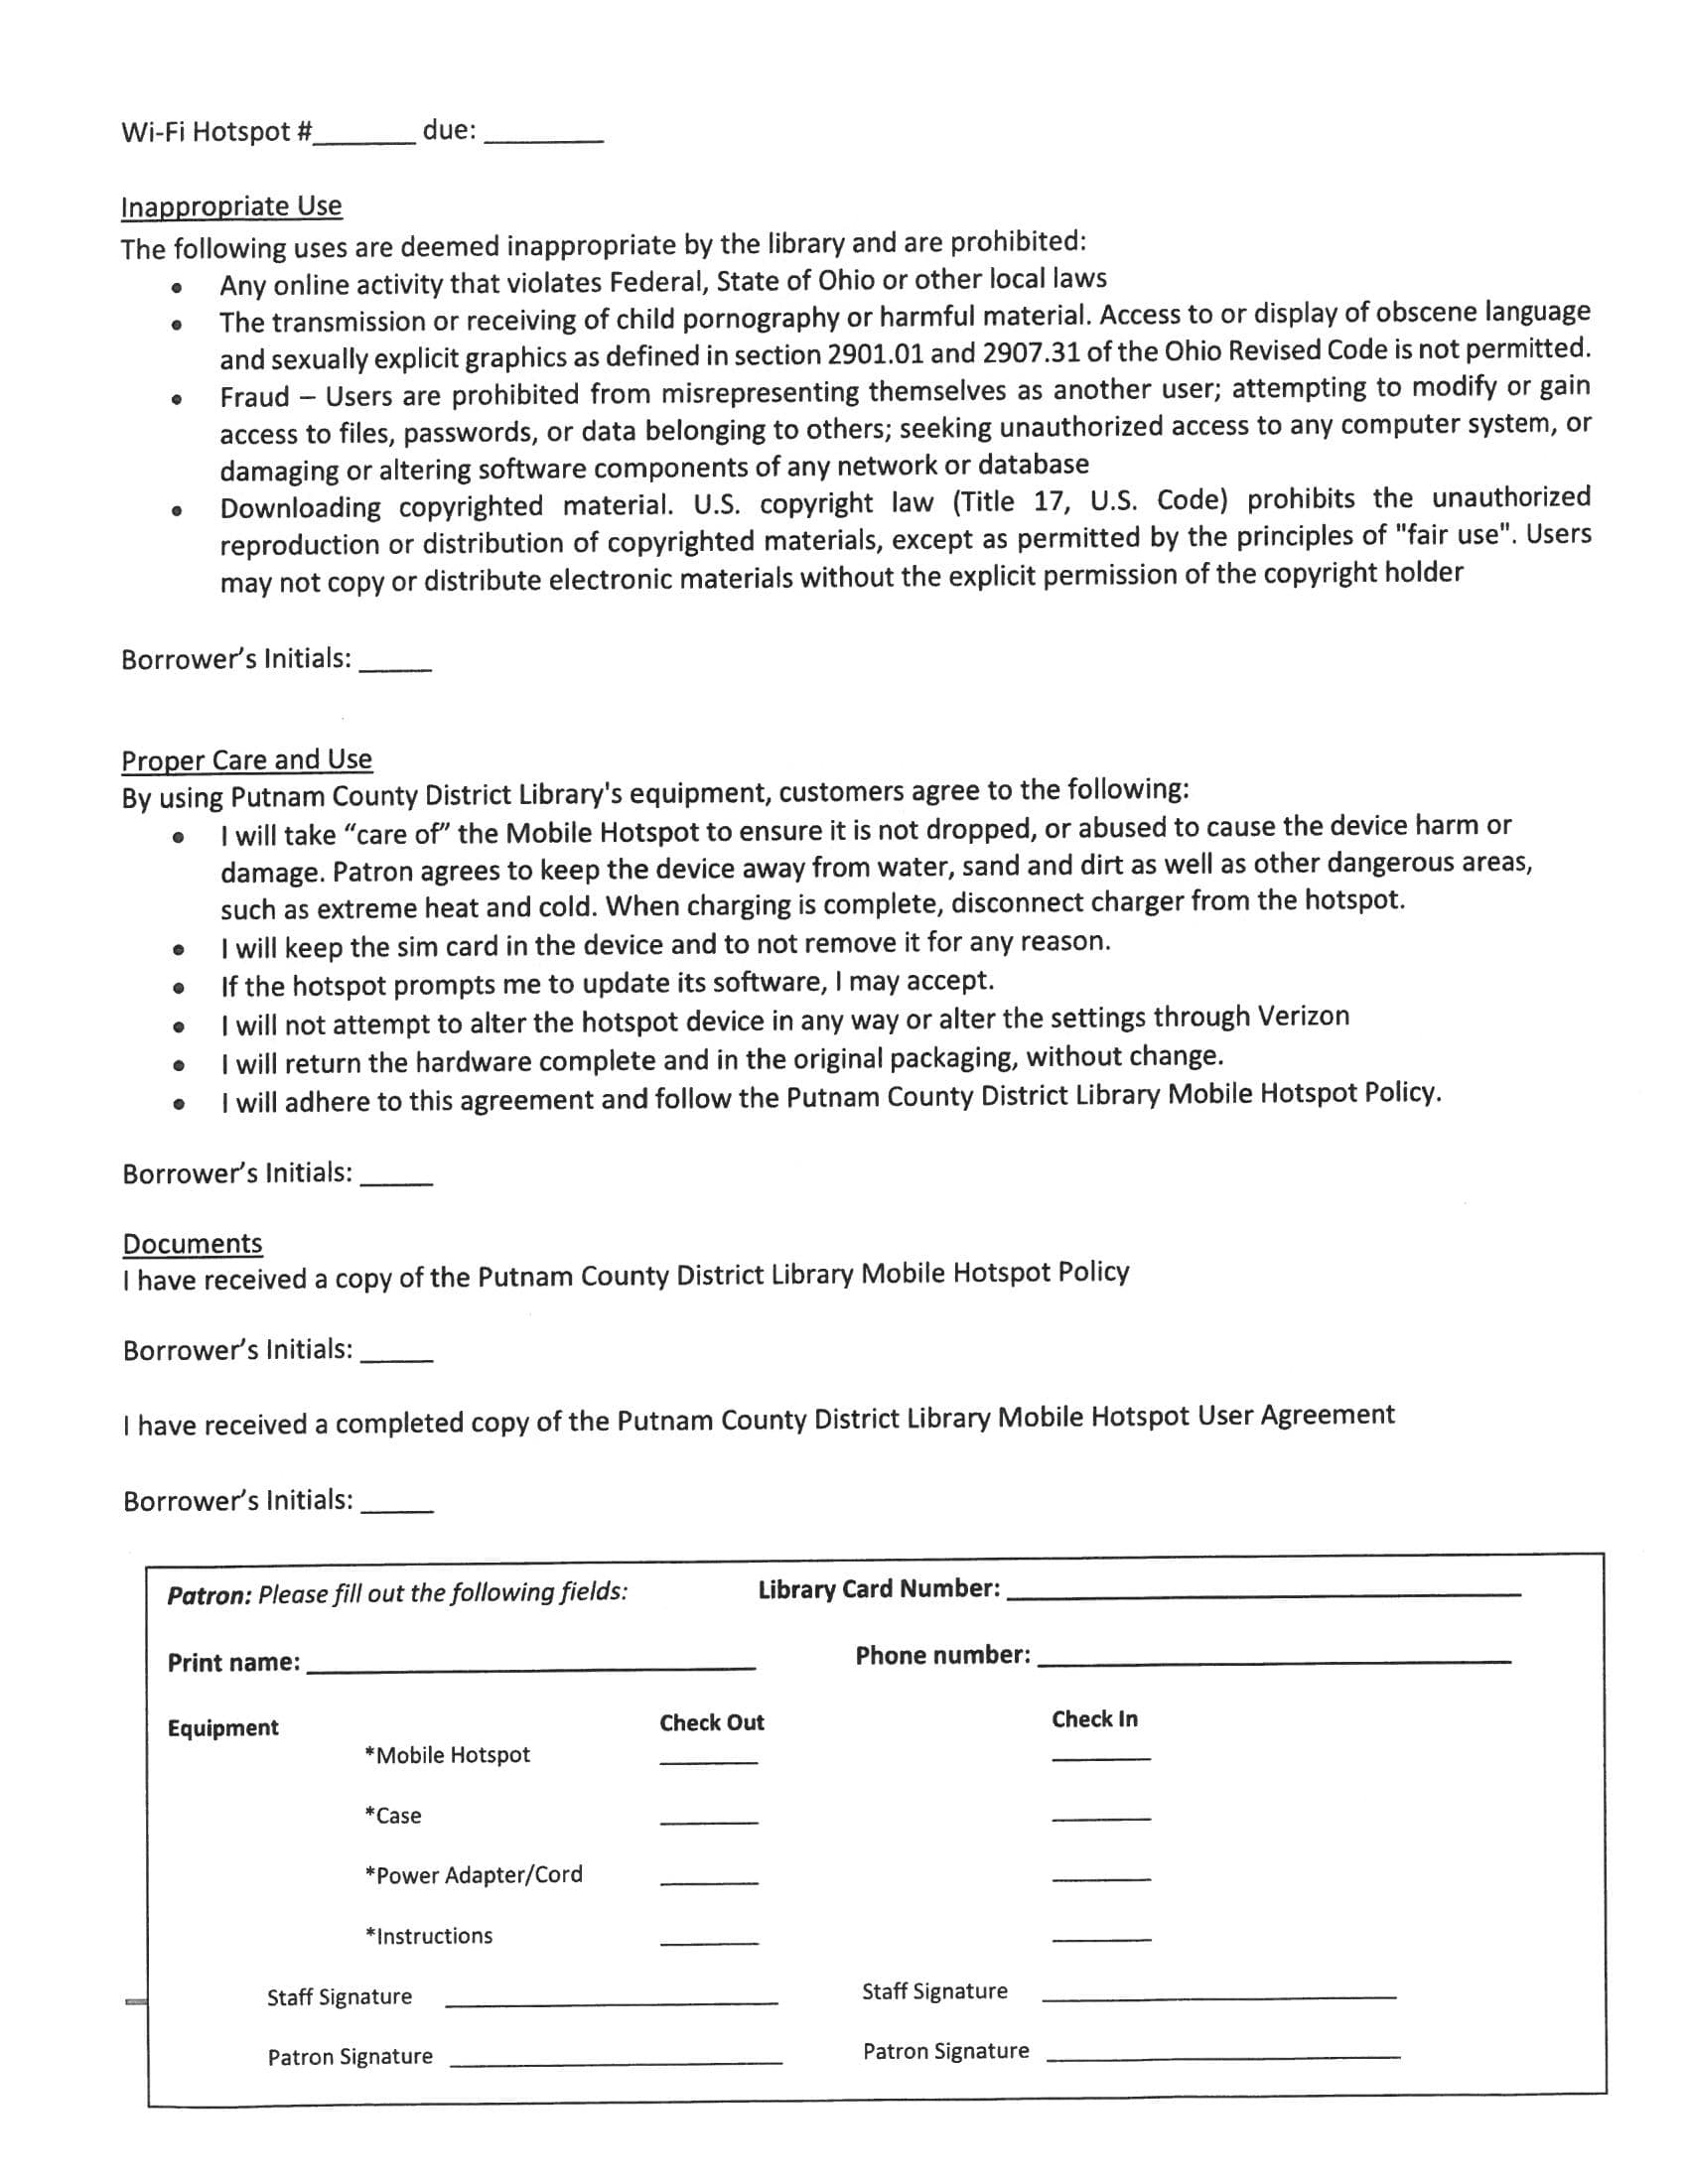 PCDL Mobile Hotspot Loan Agreement page 2 call 419-523-3747 ext 3 for more information